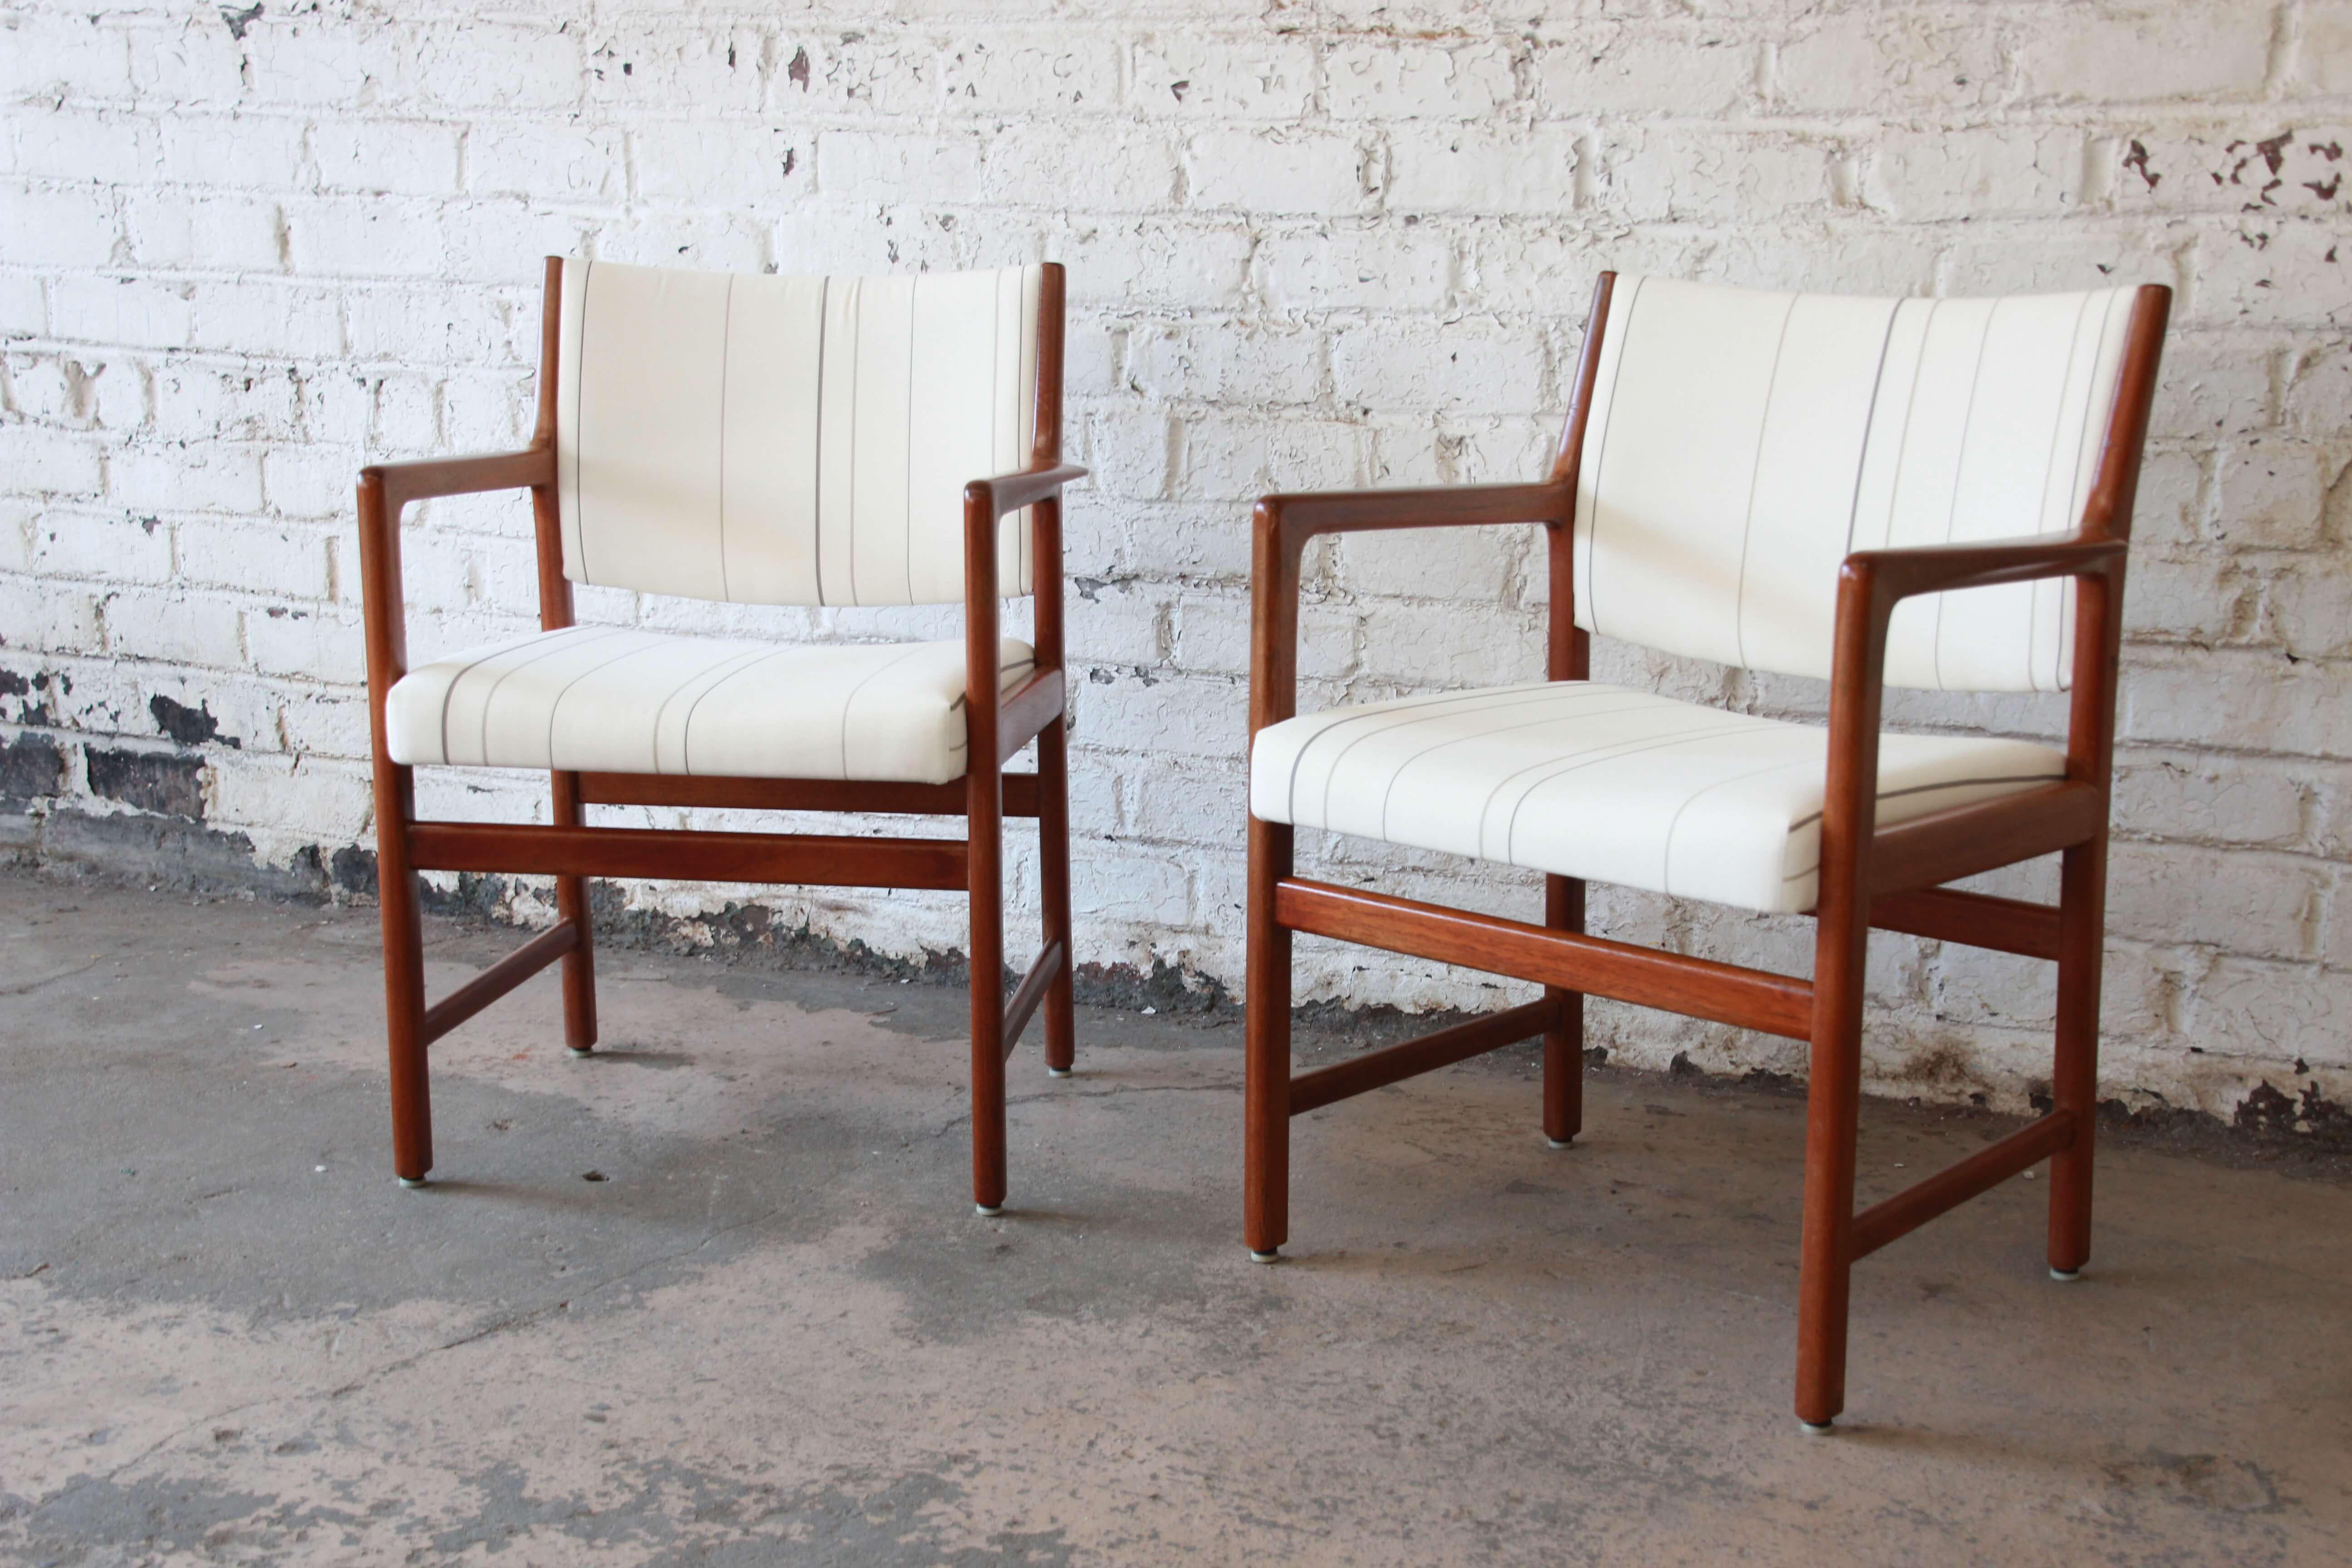 Offering a very nice pair of Swedish modern solid teak arm chairs by Karl Erik Ekselius. The chairs are made from solid teak with a nice wide frame and arm rest for added comfort. The upholstery is clean and the chairs sit comfortably and the foam